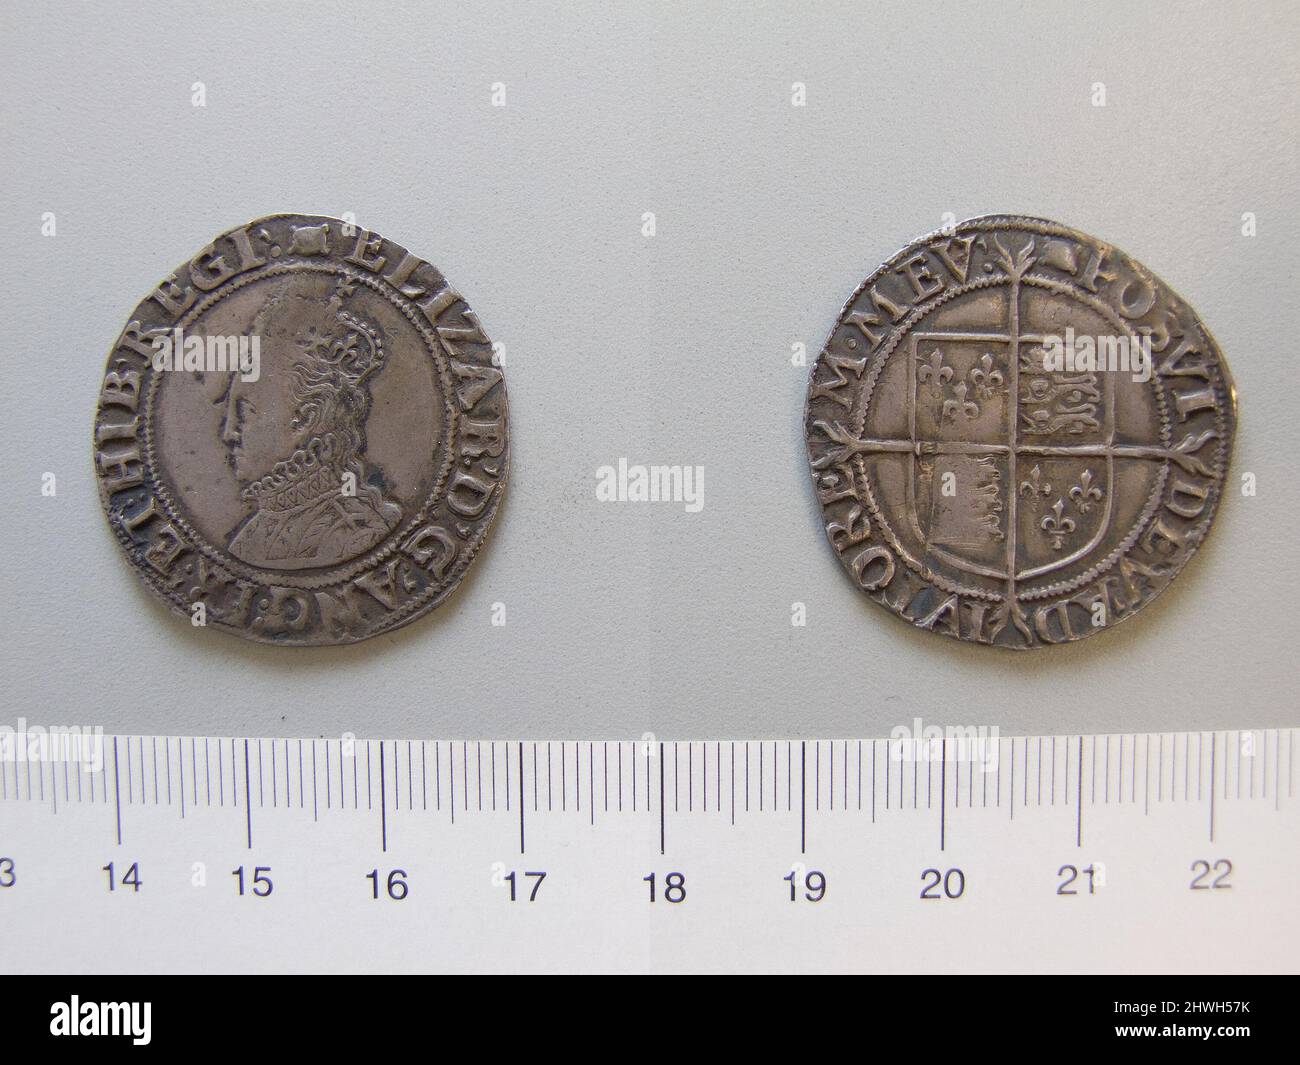 1 Shilling of Elizabeth I, Queen of England from London. Ruler: Elizabeth I, Queen of England, British, 1533–1603, ruled 1558–1603 Mint: London Artist: Unknown Stock Photo